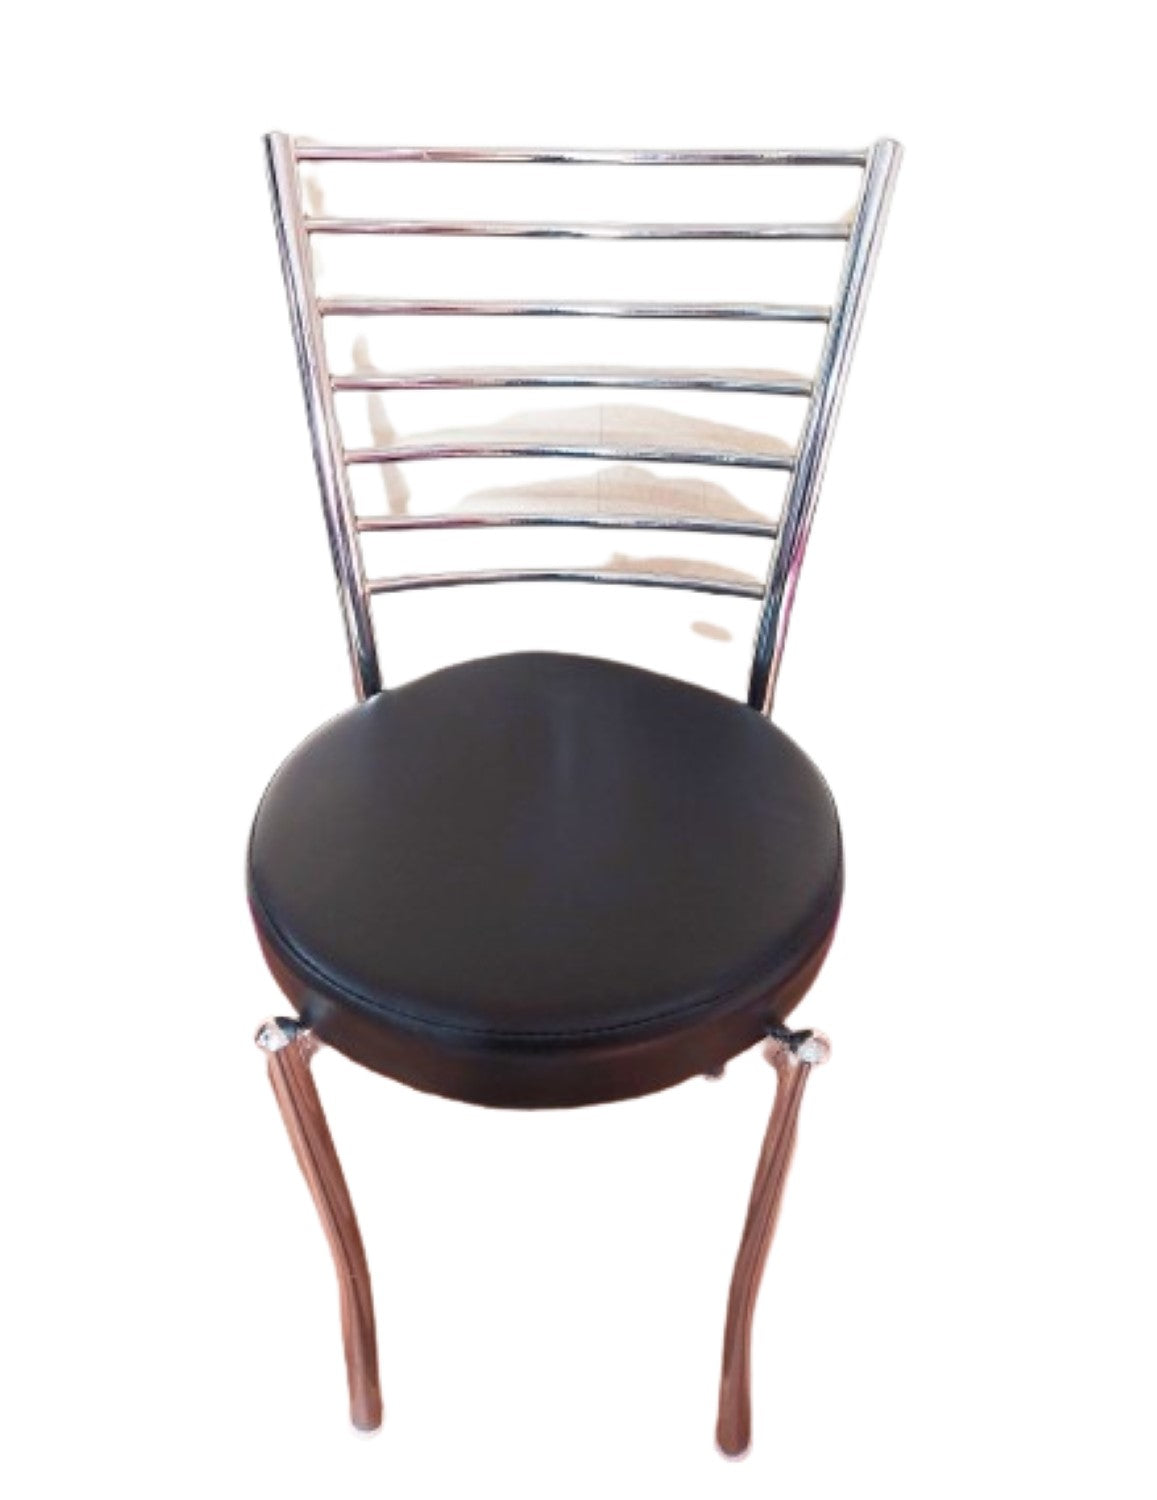 Bowzar Stainless Steel Chair 7 Wire with Cushion for Dining Restaurant